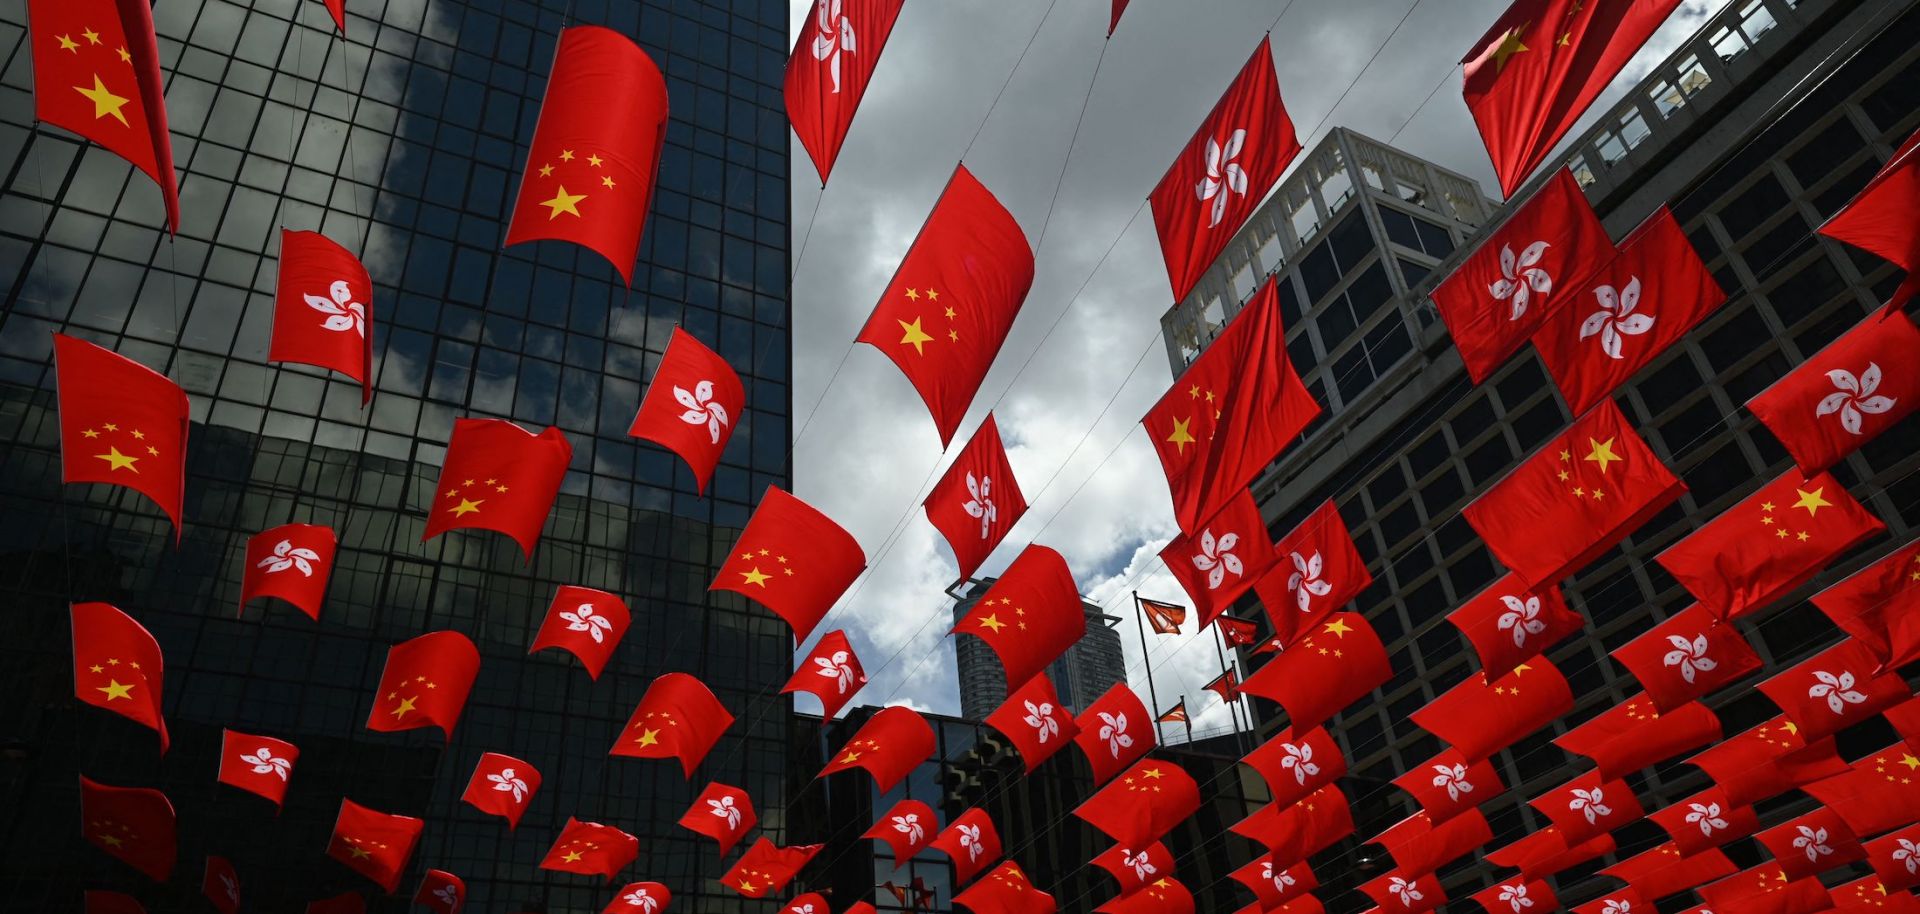 Chinese and Hong Kong flags are strung between buildings to mark the 26th anniversary of the city's handover from Britain to China on June 27, 2023, in Hong Kong.